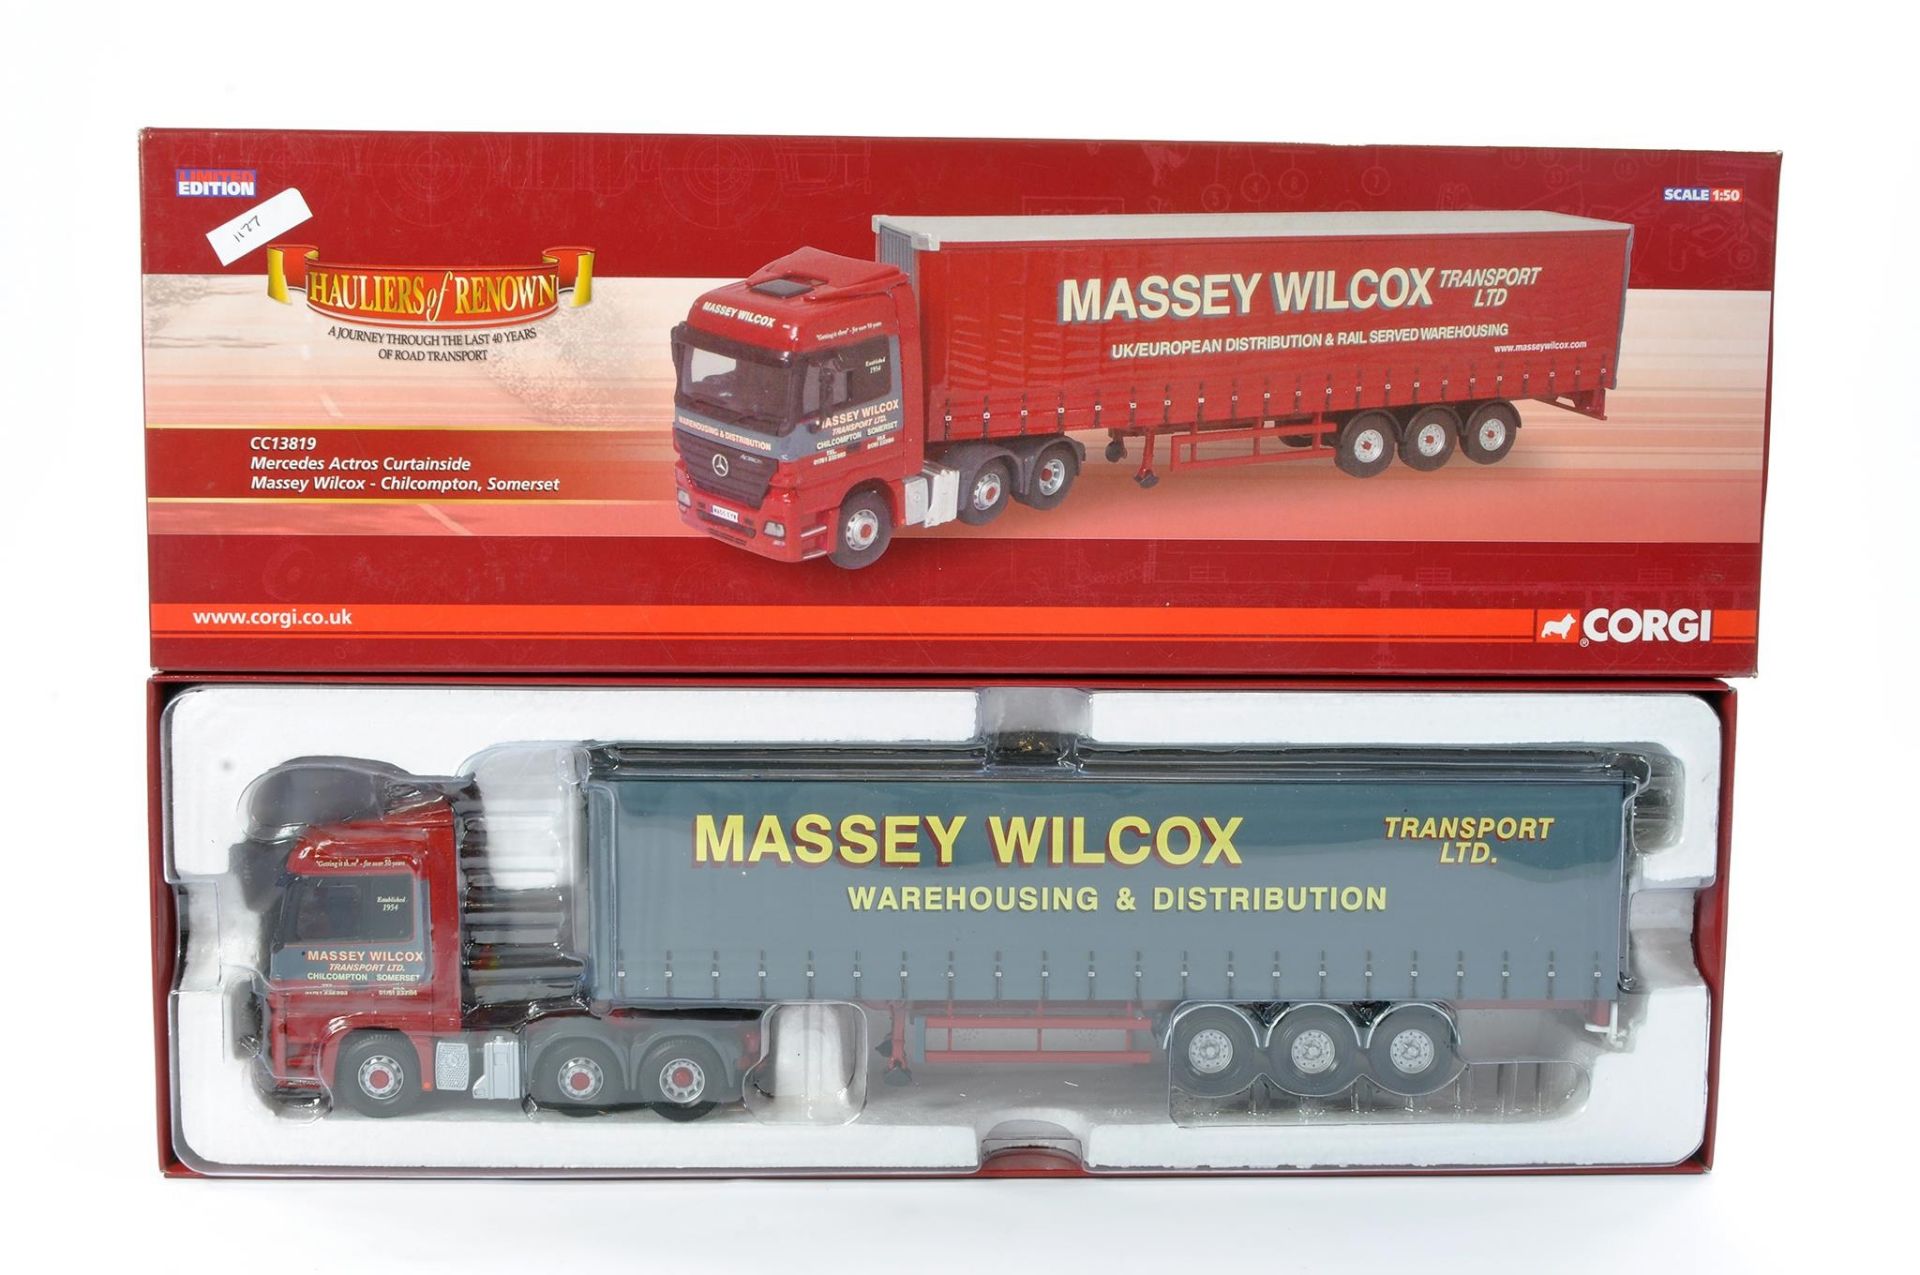 Corgi Diecast Model Truck issue comprising No. CC13819 Mercedes Actros Curtainside in livery of